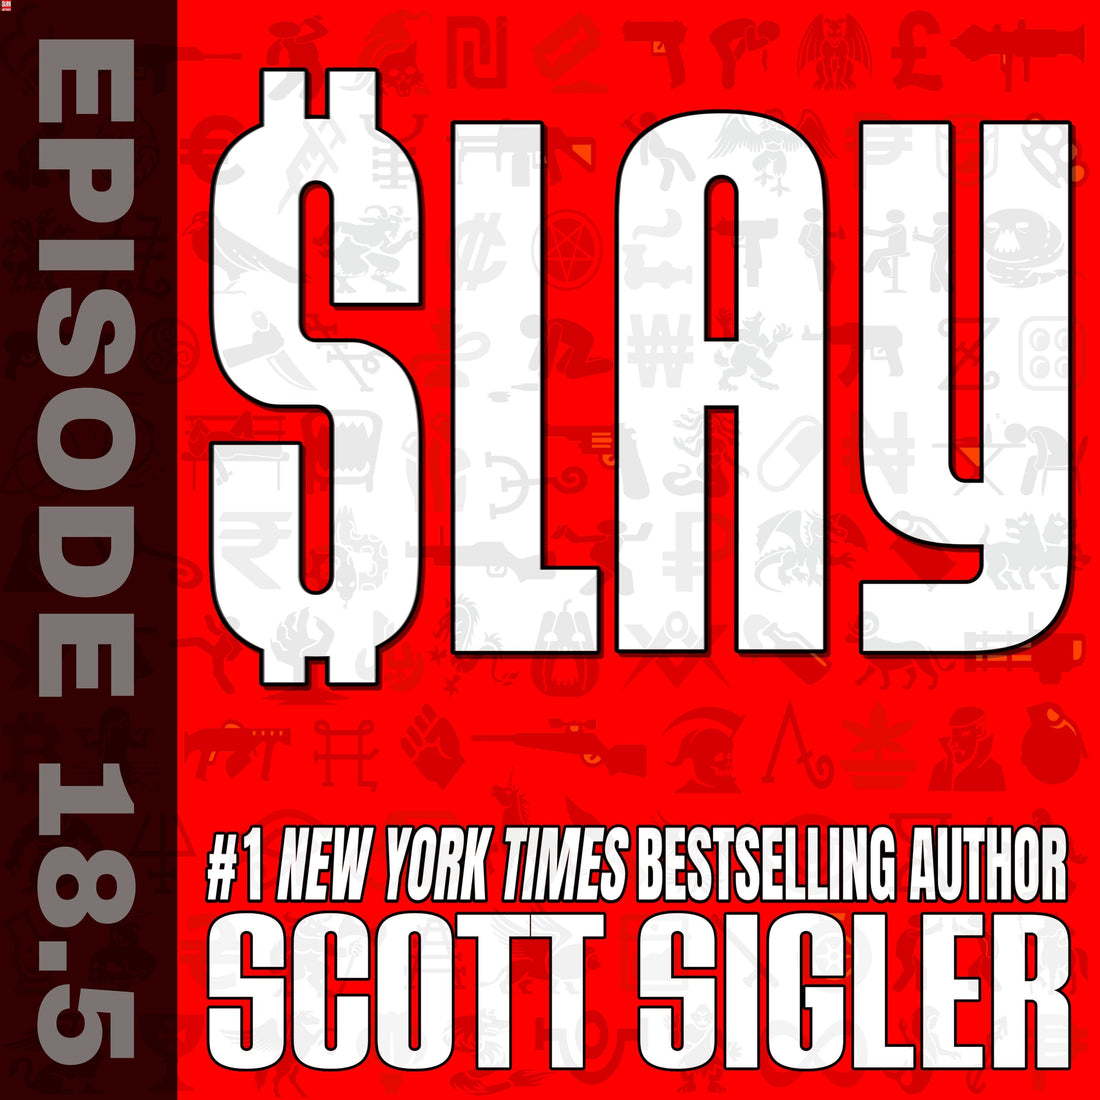 SLAY Episode 18.5: Fan questions that could change the course of the story!